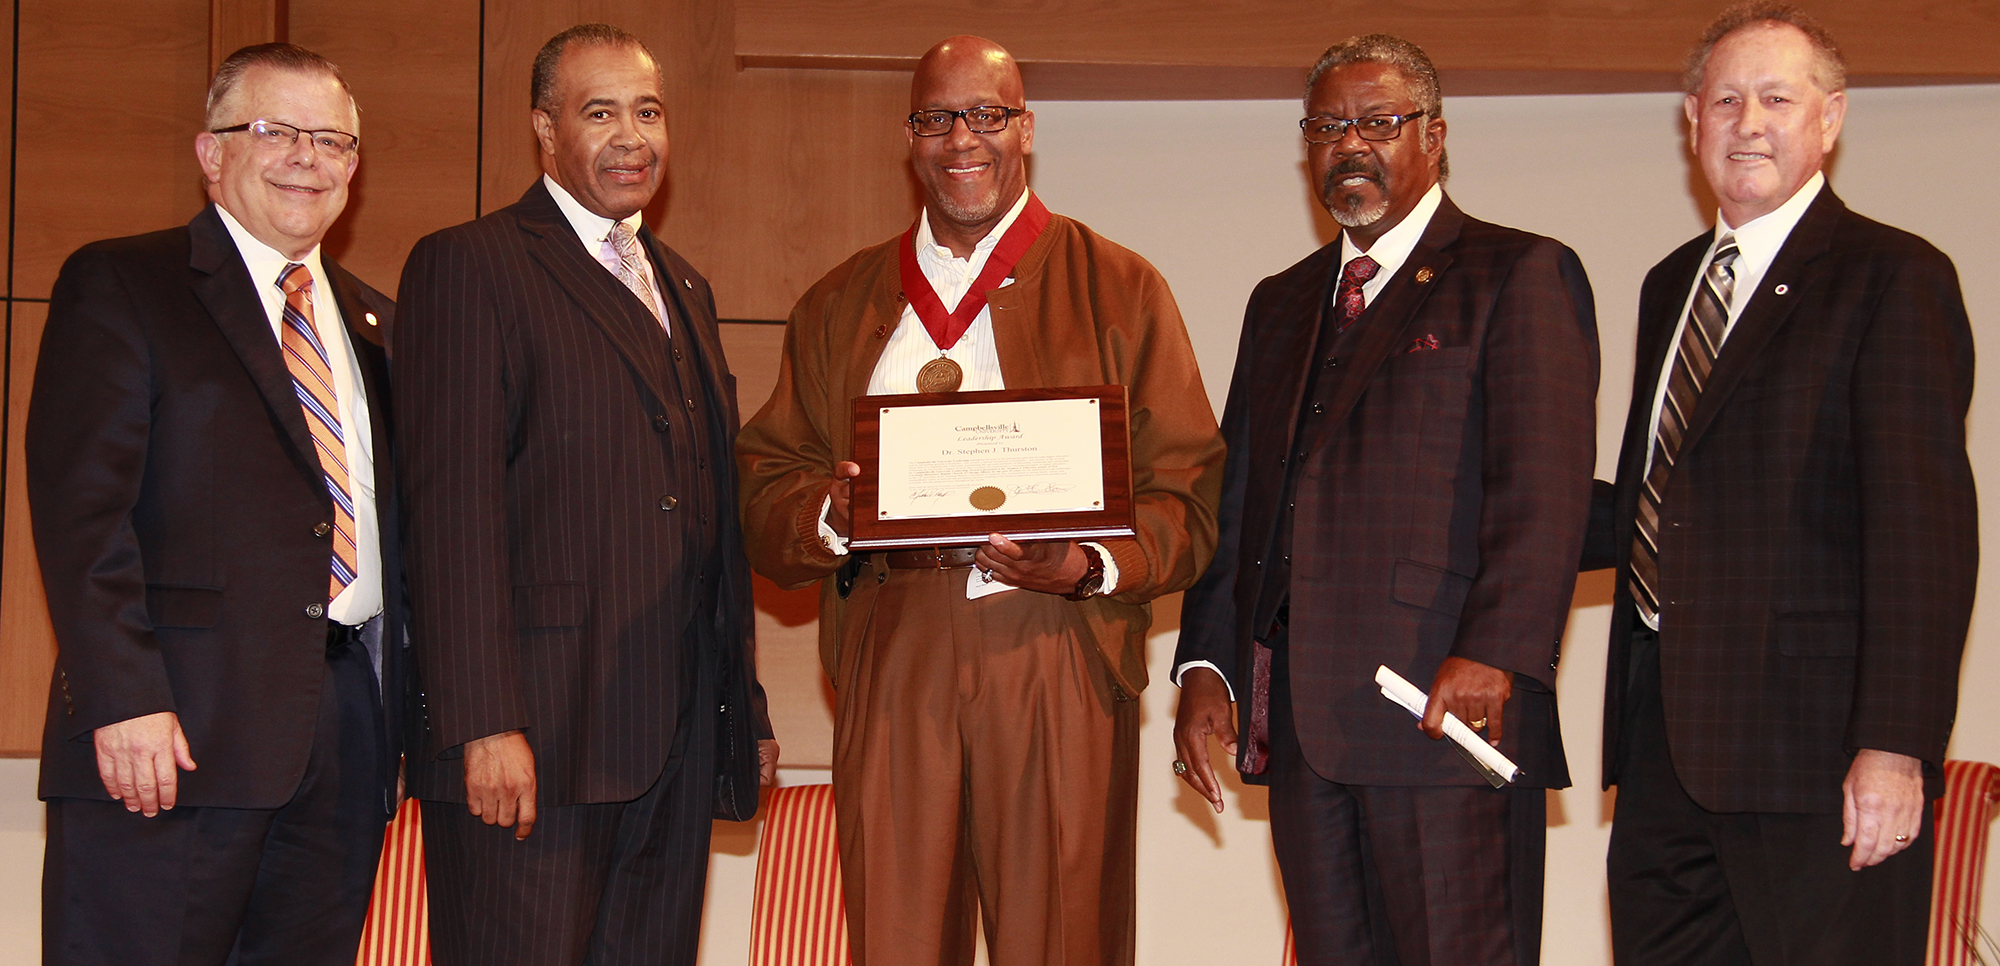 Dr. Stephen J. Thurston, third from left, senior pastor of New Covenant Missionary Baptist Church in Chicago, Ill. receives Campbellsville Universities Leadership Award during a weekly Chapel service that he spoke at. Presenting the award is, from left: Dr. John Chowning, vice president of Church and External Relations and executive assistant to the president; Dr. Joseph Owens, chair of CU's Board of Trustees; Thurston; Dr. C.B. Akins, pastor of First Baptist Church Bracktown in Lexington, Ky. and moderator of the General Association of Baptists in Kentucky; and Dr. Frank Cheatham, senior vice president of Academic Affairs. (Campbellsville University Photo by Rachel DeCoursey)